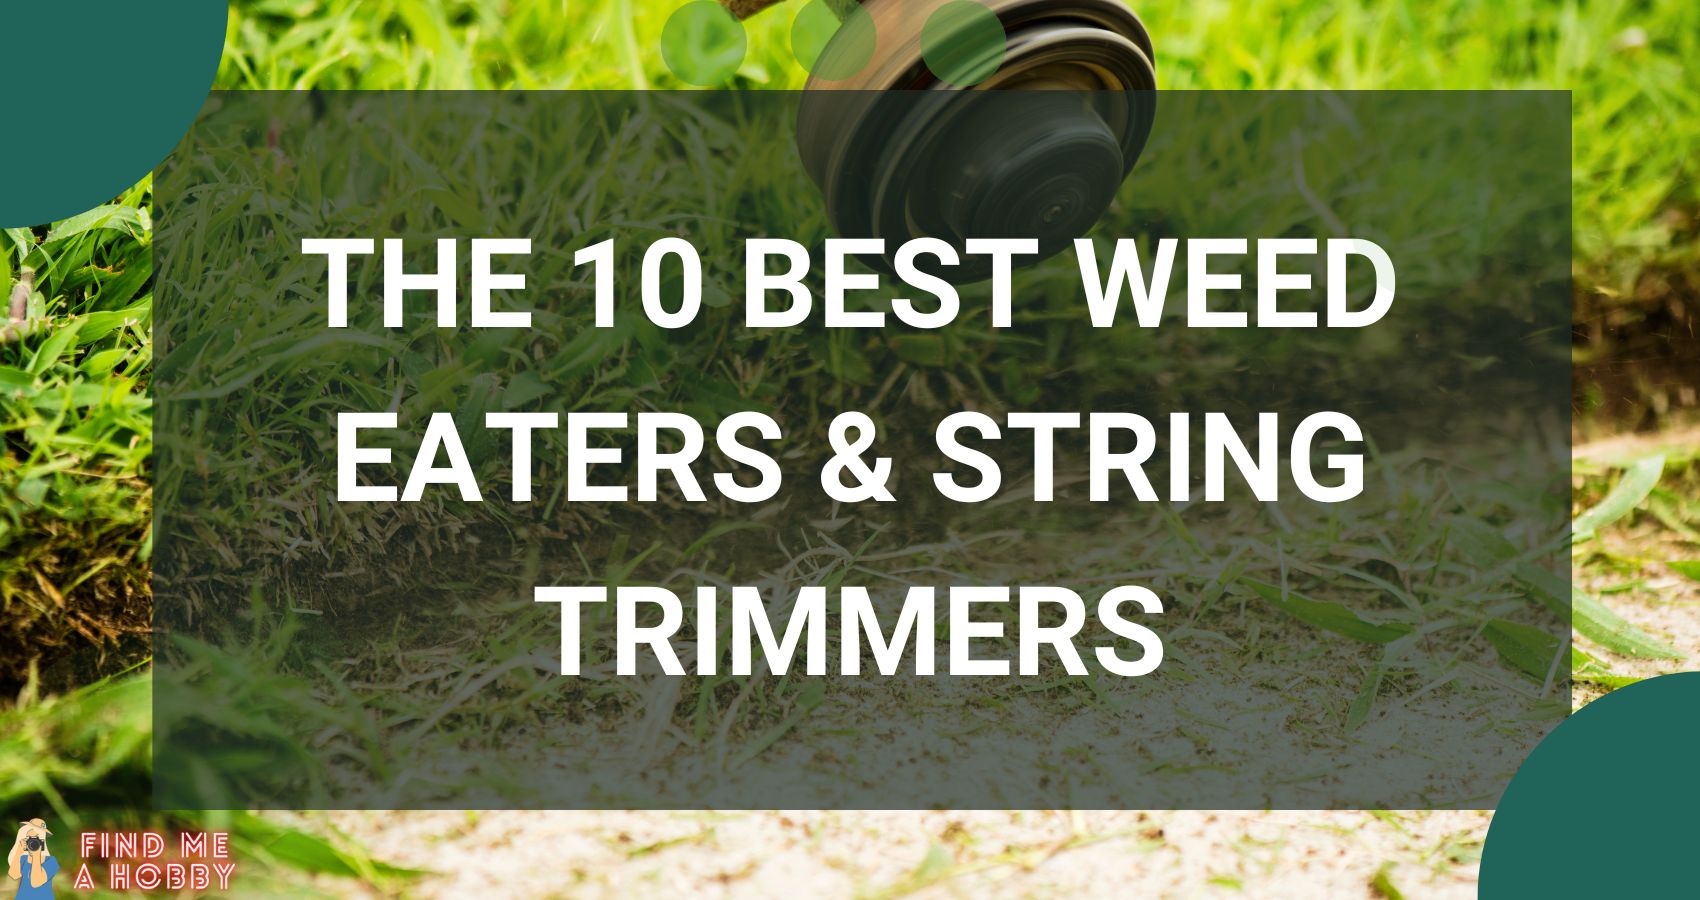 The 10 Best Weed Eaters & String Trimmers